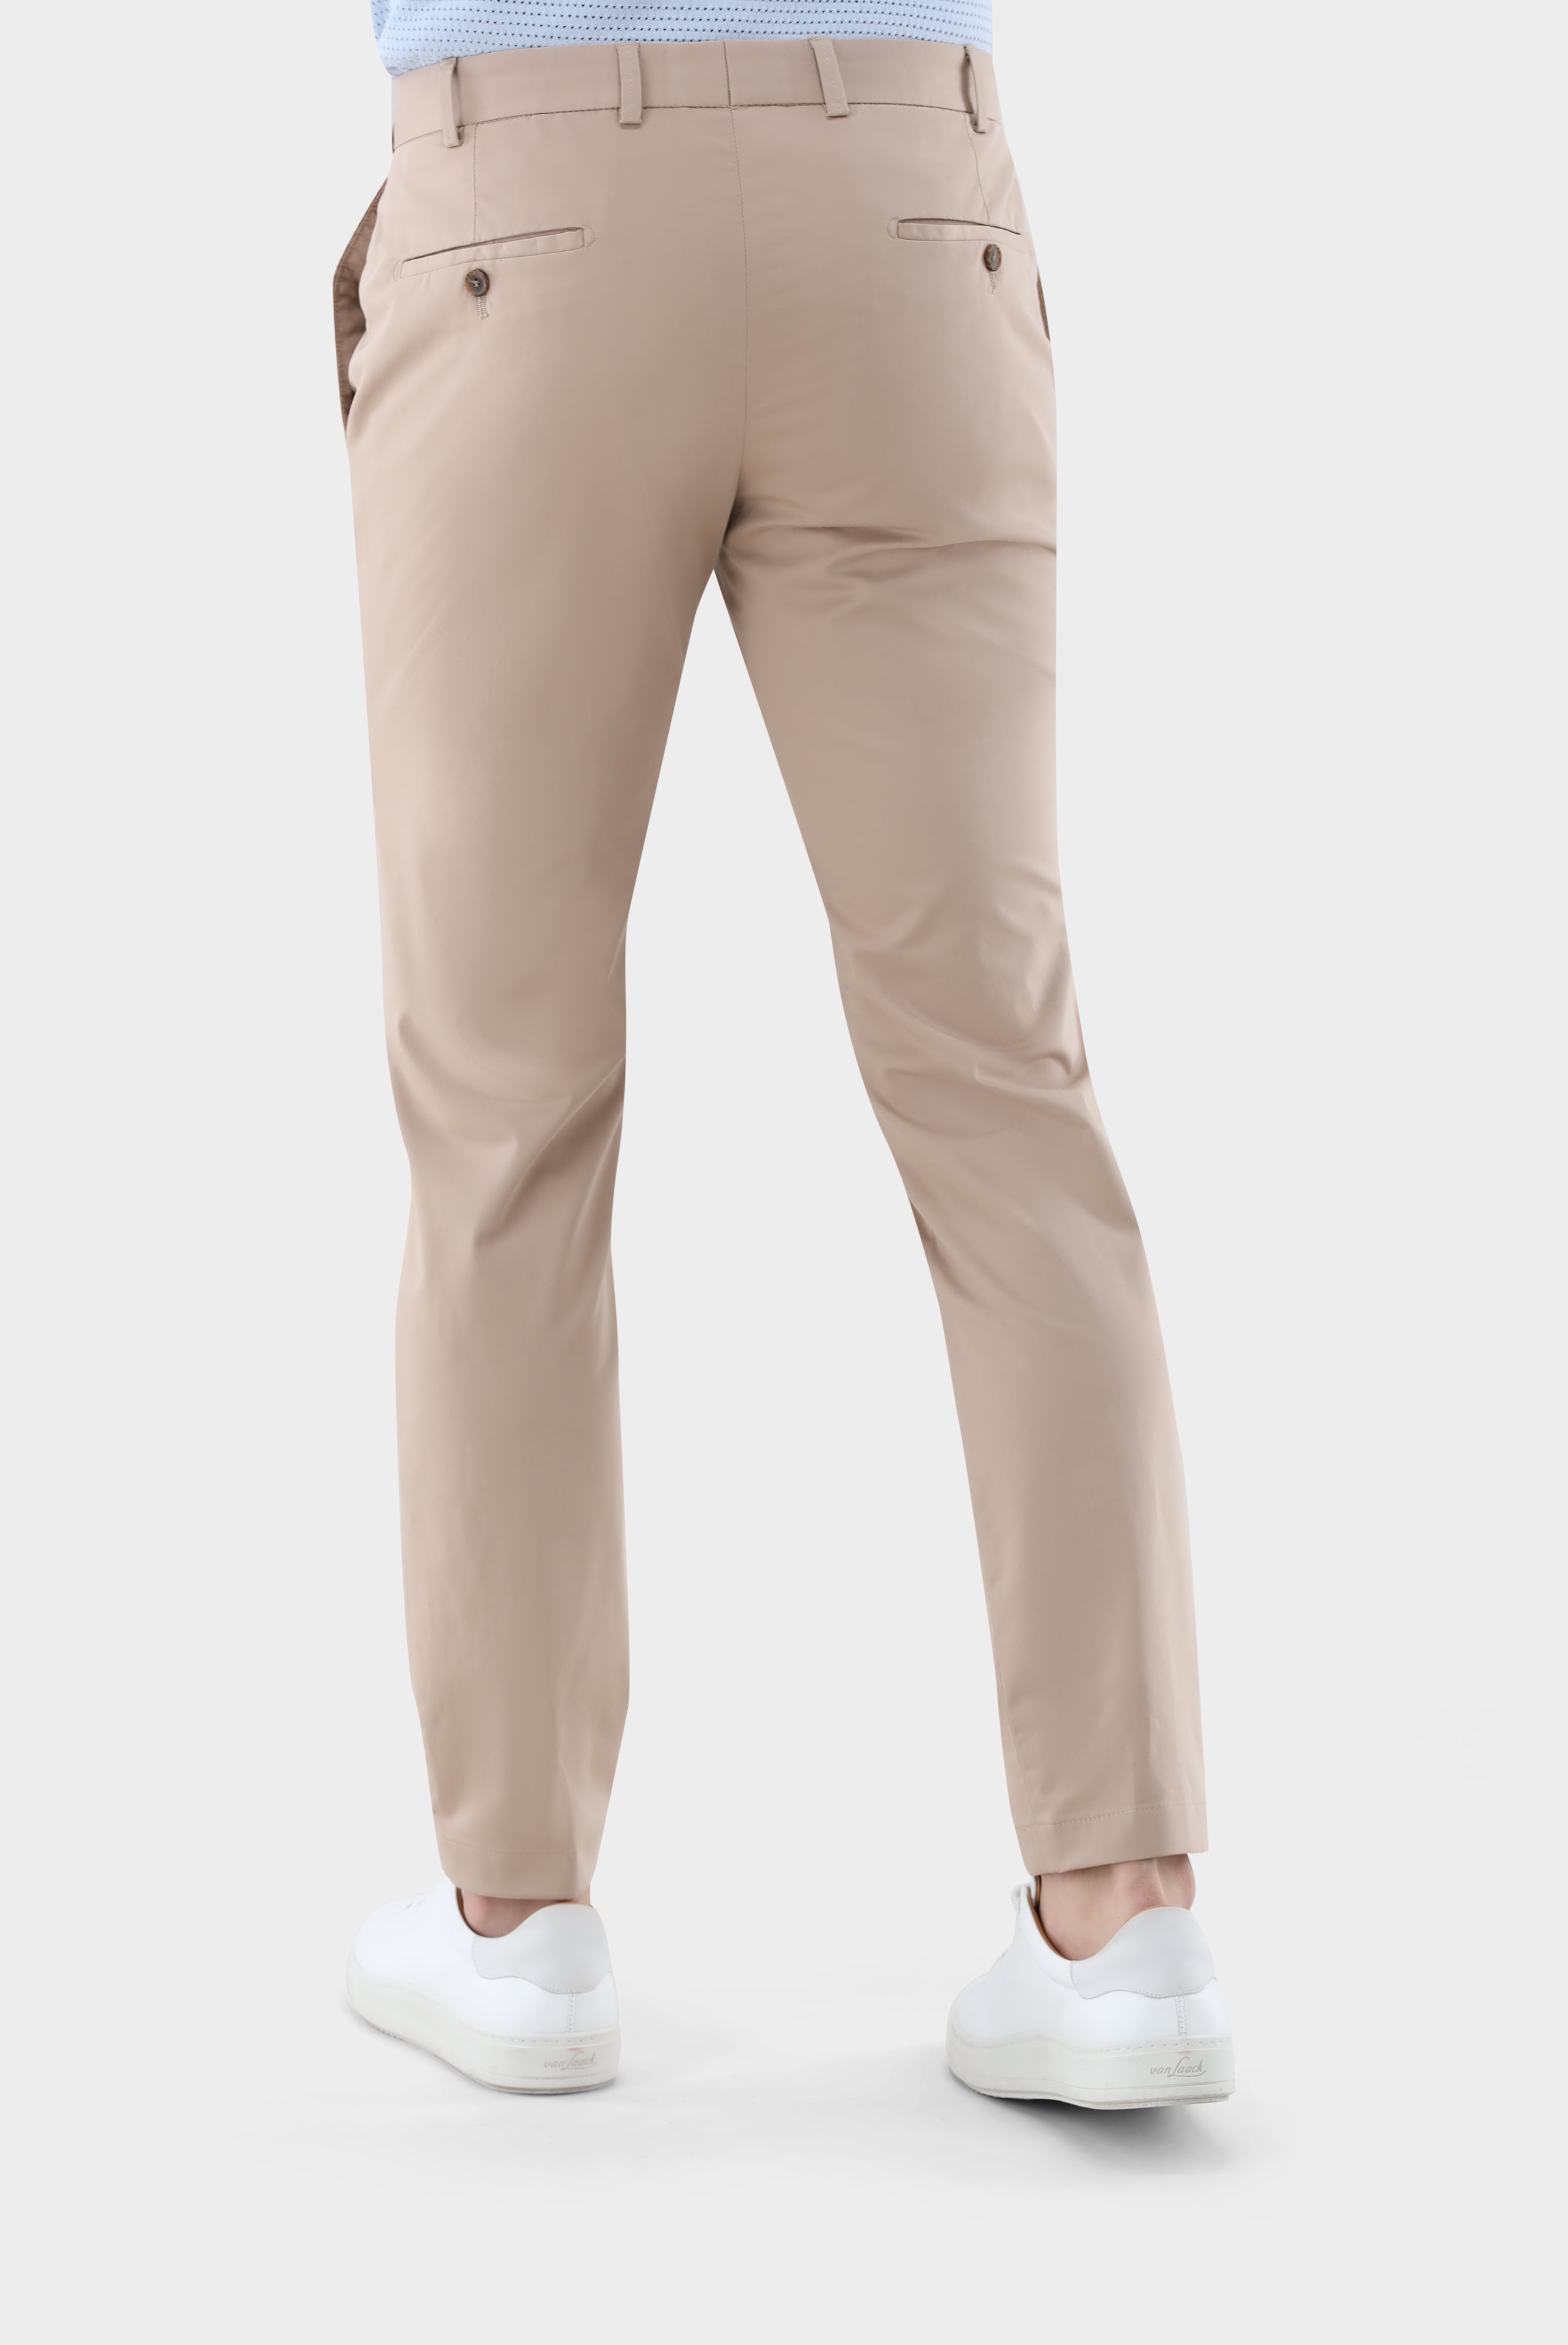 Jeans & Trousers+Stretch Chino Trousers+80.7858..J00151.140.50